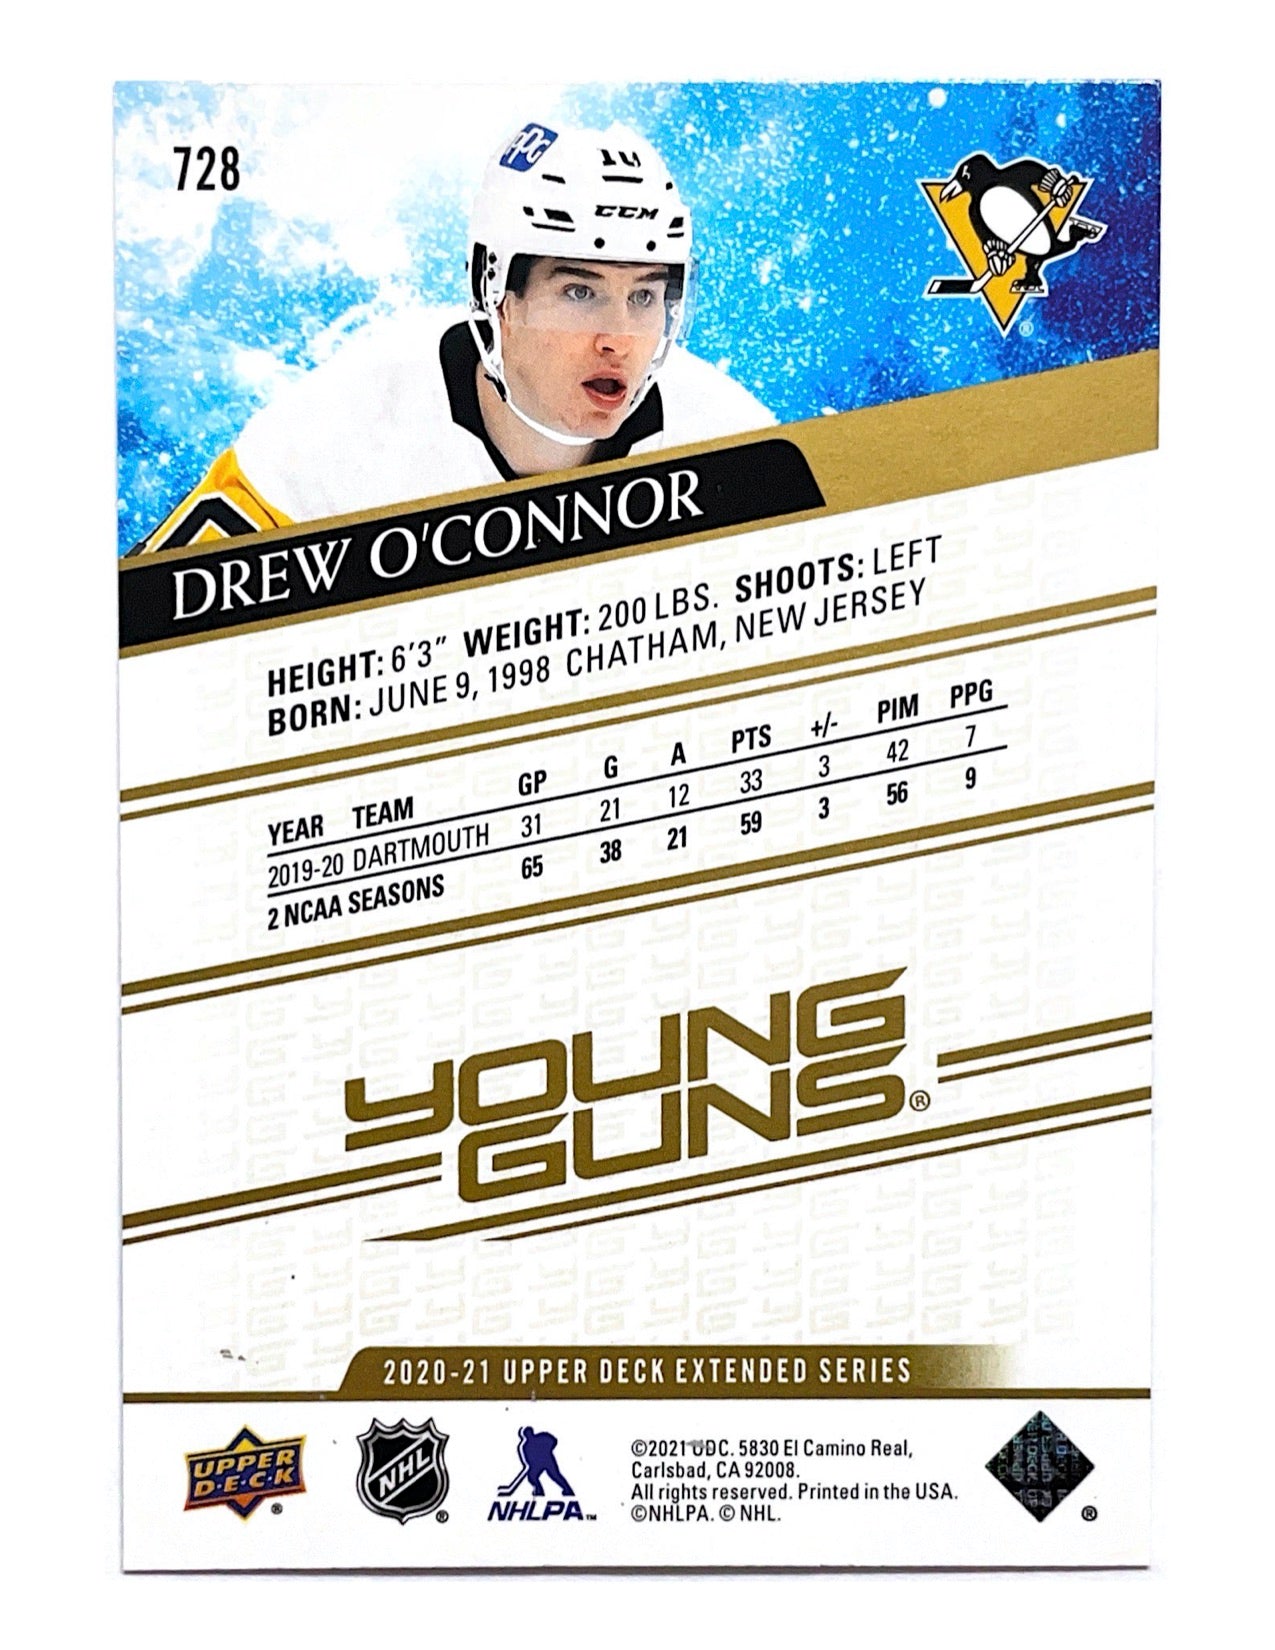 Drew O'Connor 2020-21 Upper Deck Extended Series Young Guns Silver Foil #728